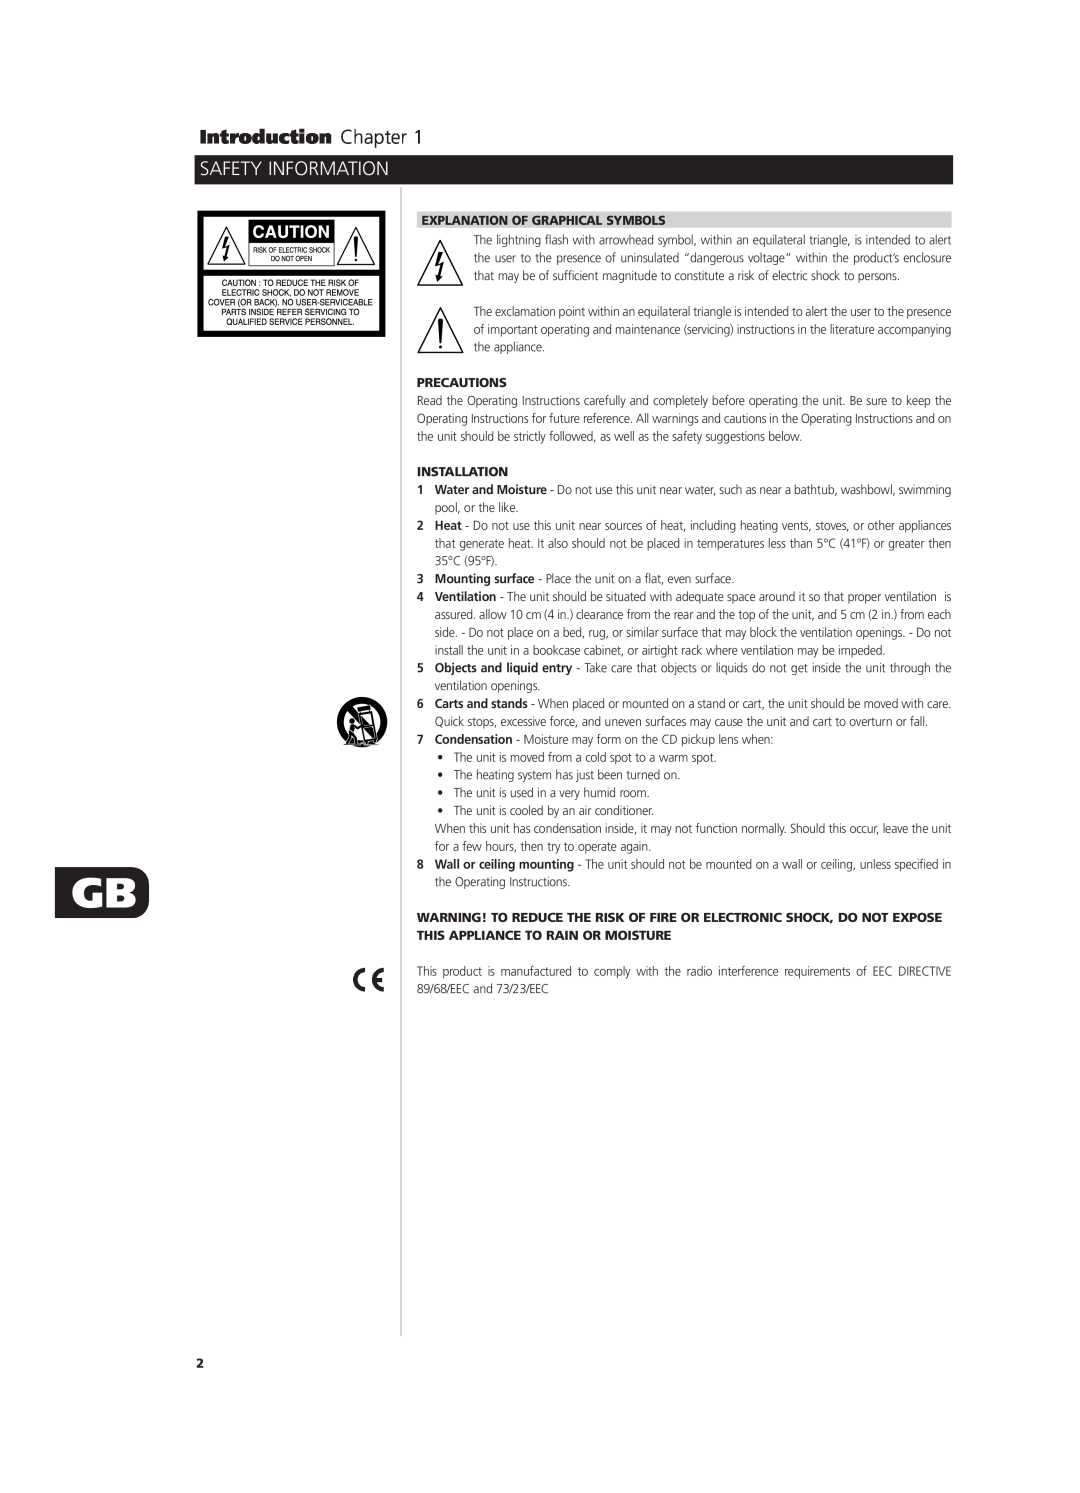 NAD C660 owner manual Introduction Chapter, Safety Information, Explanation Of Graphical Symbols, Precautions, Installation 